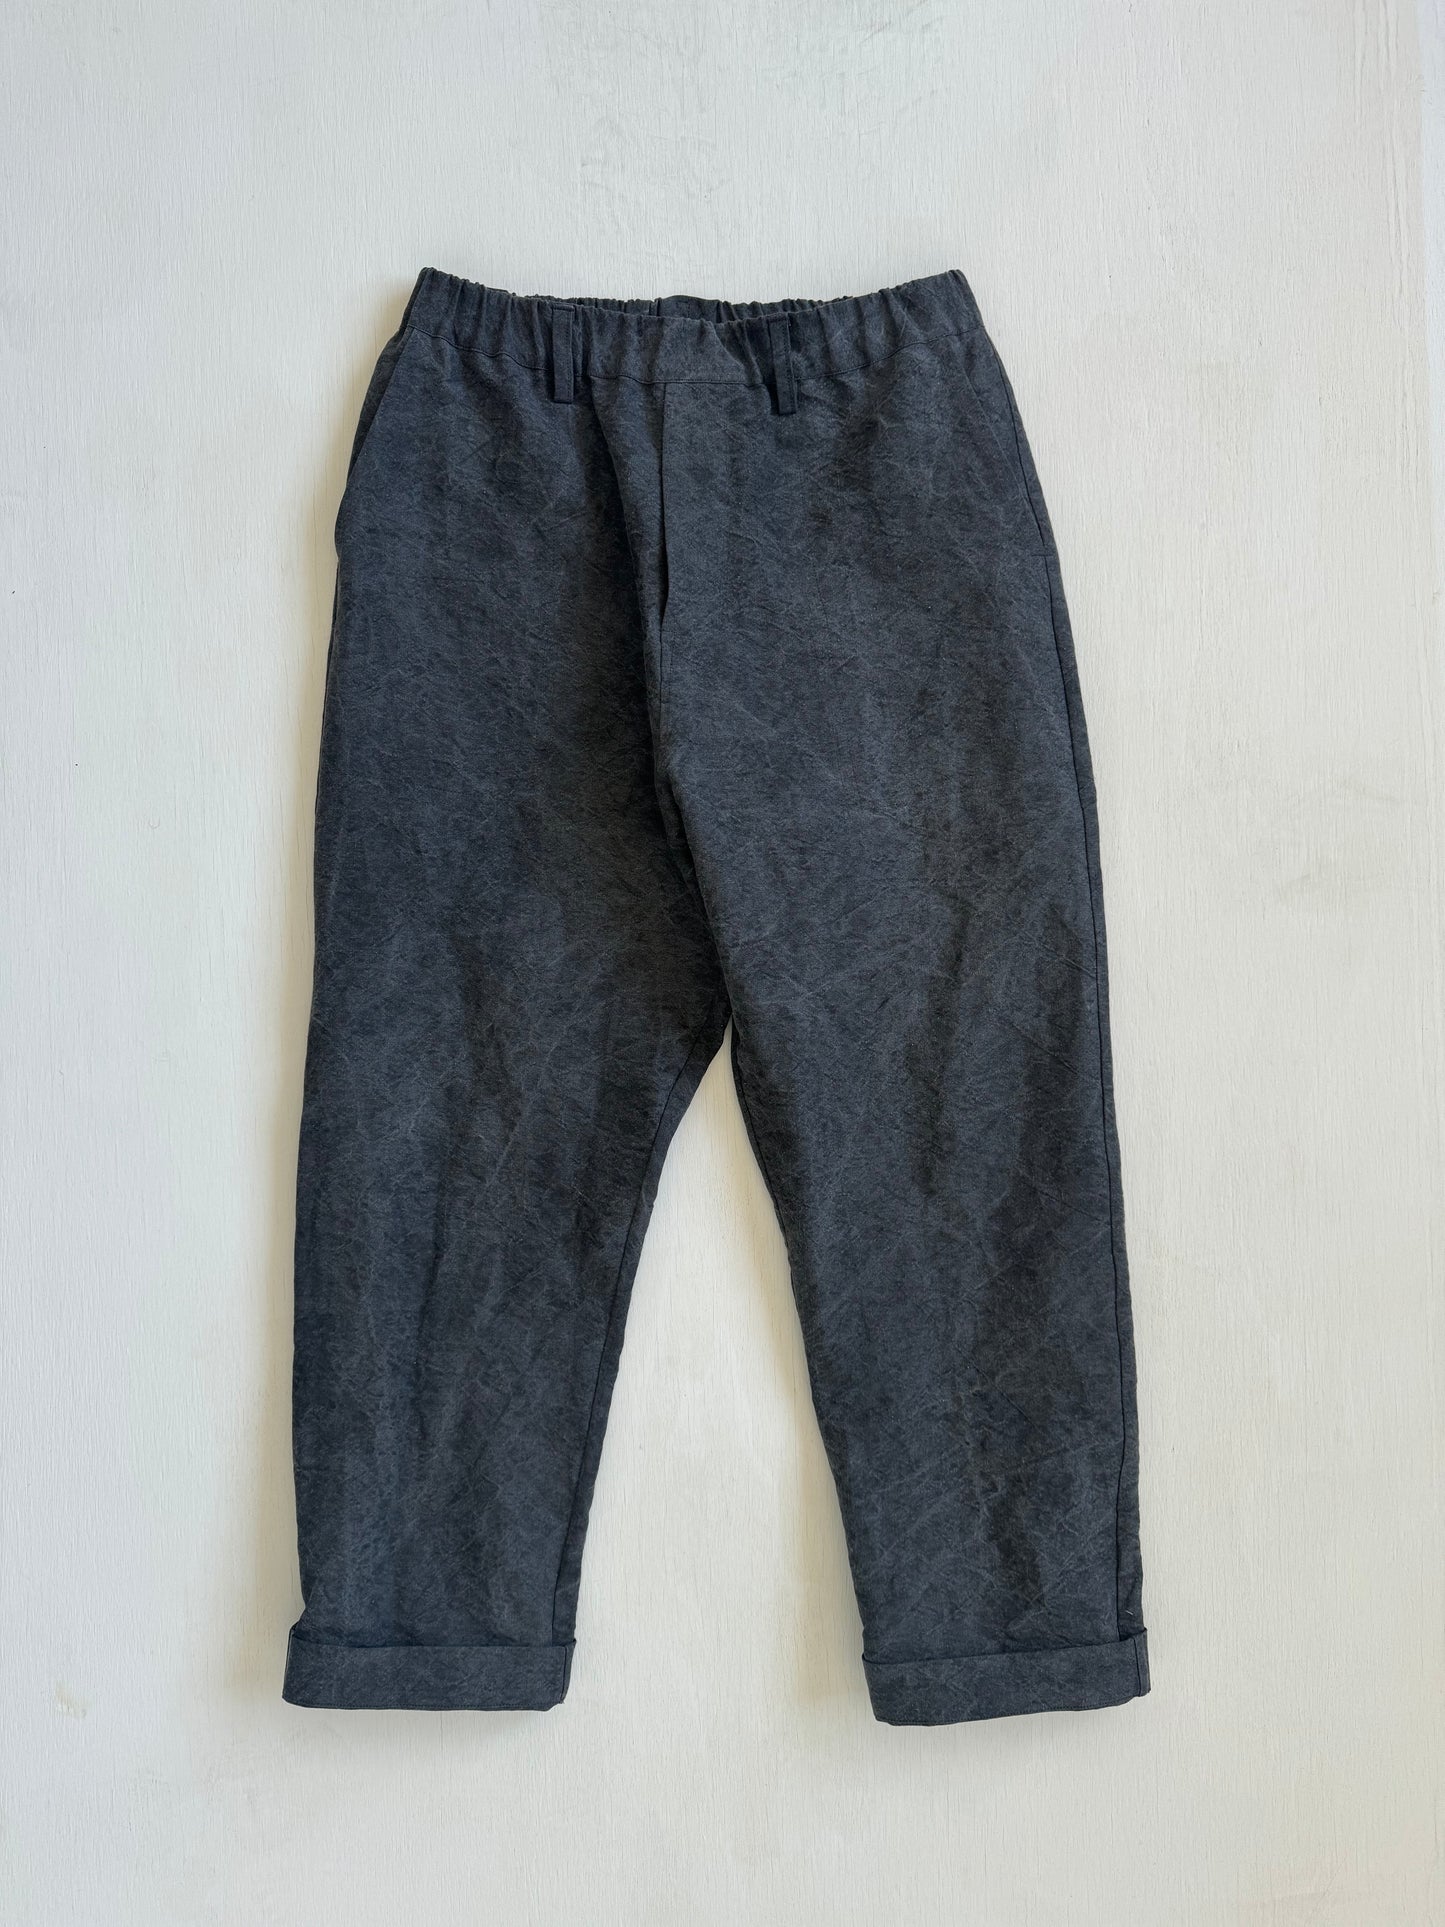 Work Pants in Charcoal Dyed Paper/Linen